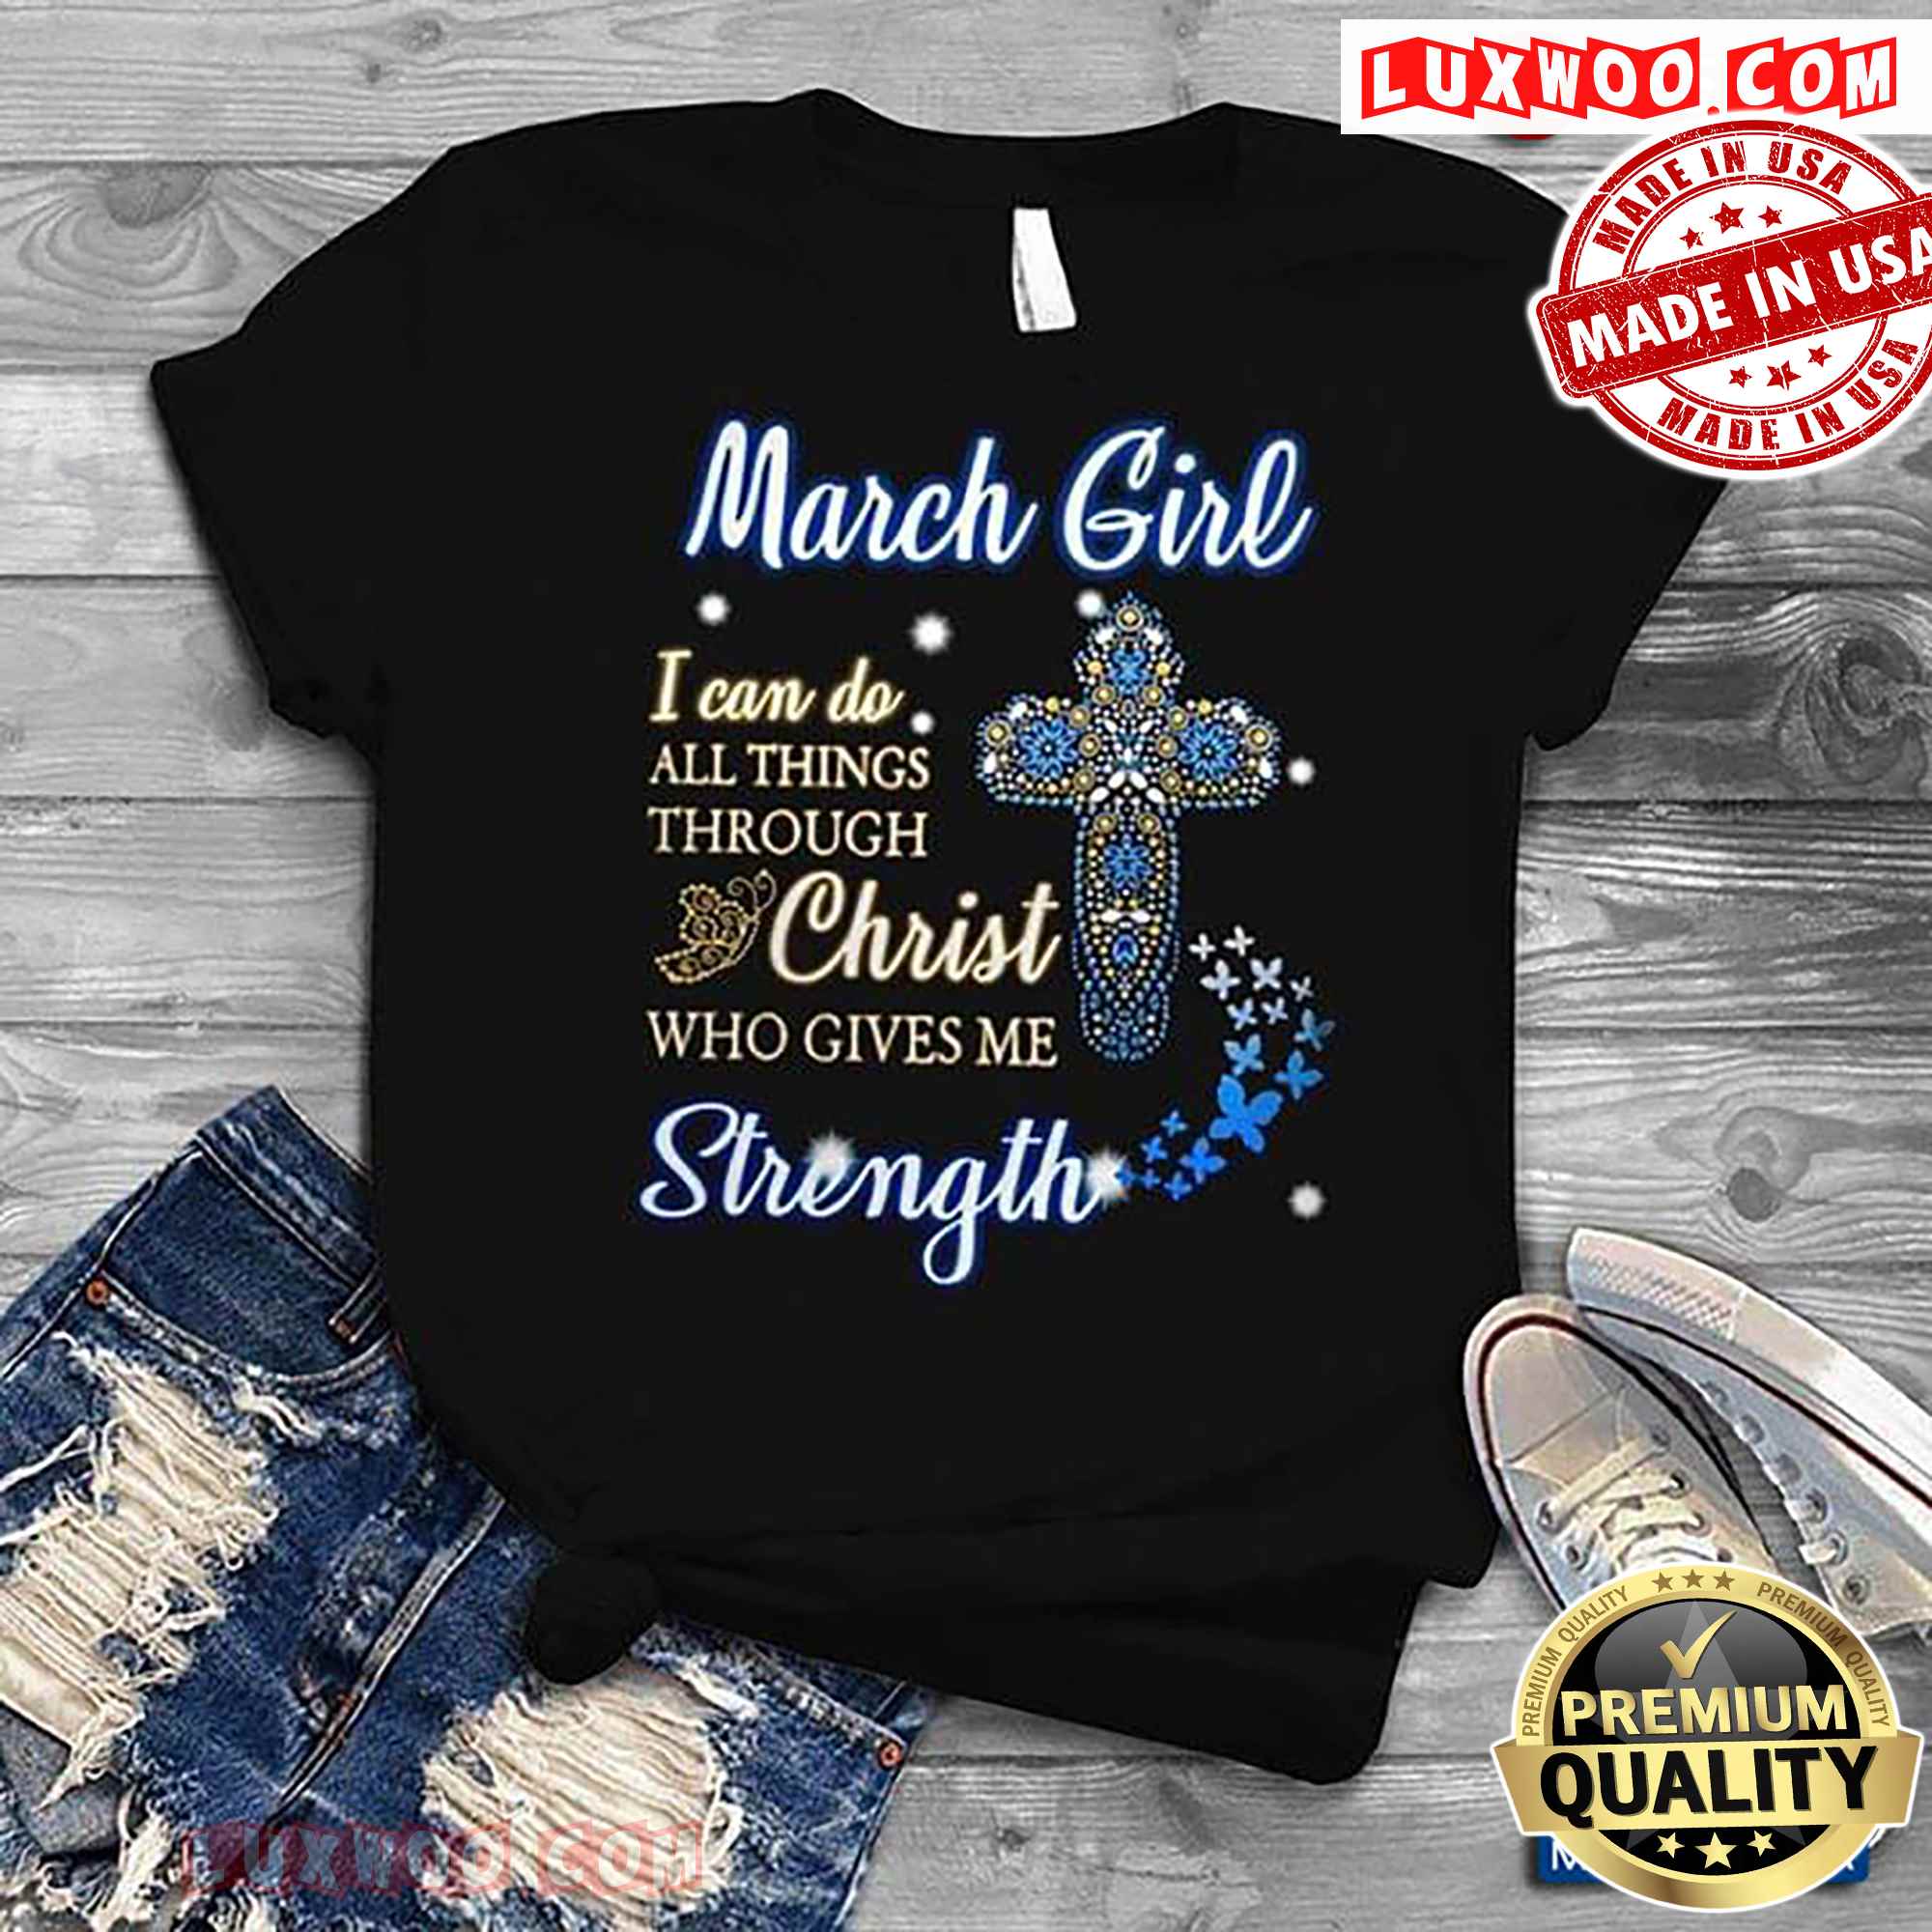 Christian Cross March Girl I Can Do All Things Through Christ Who Gives Me Strength